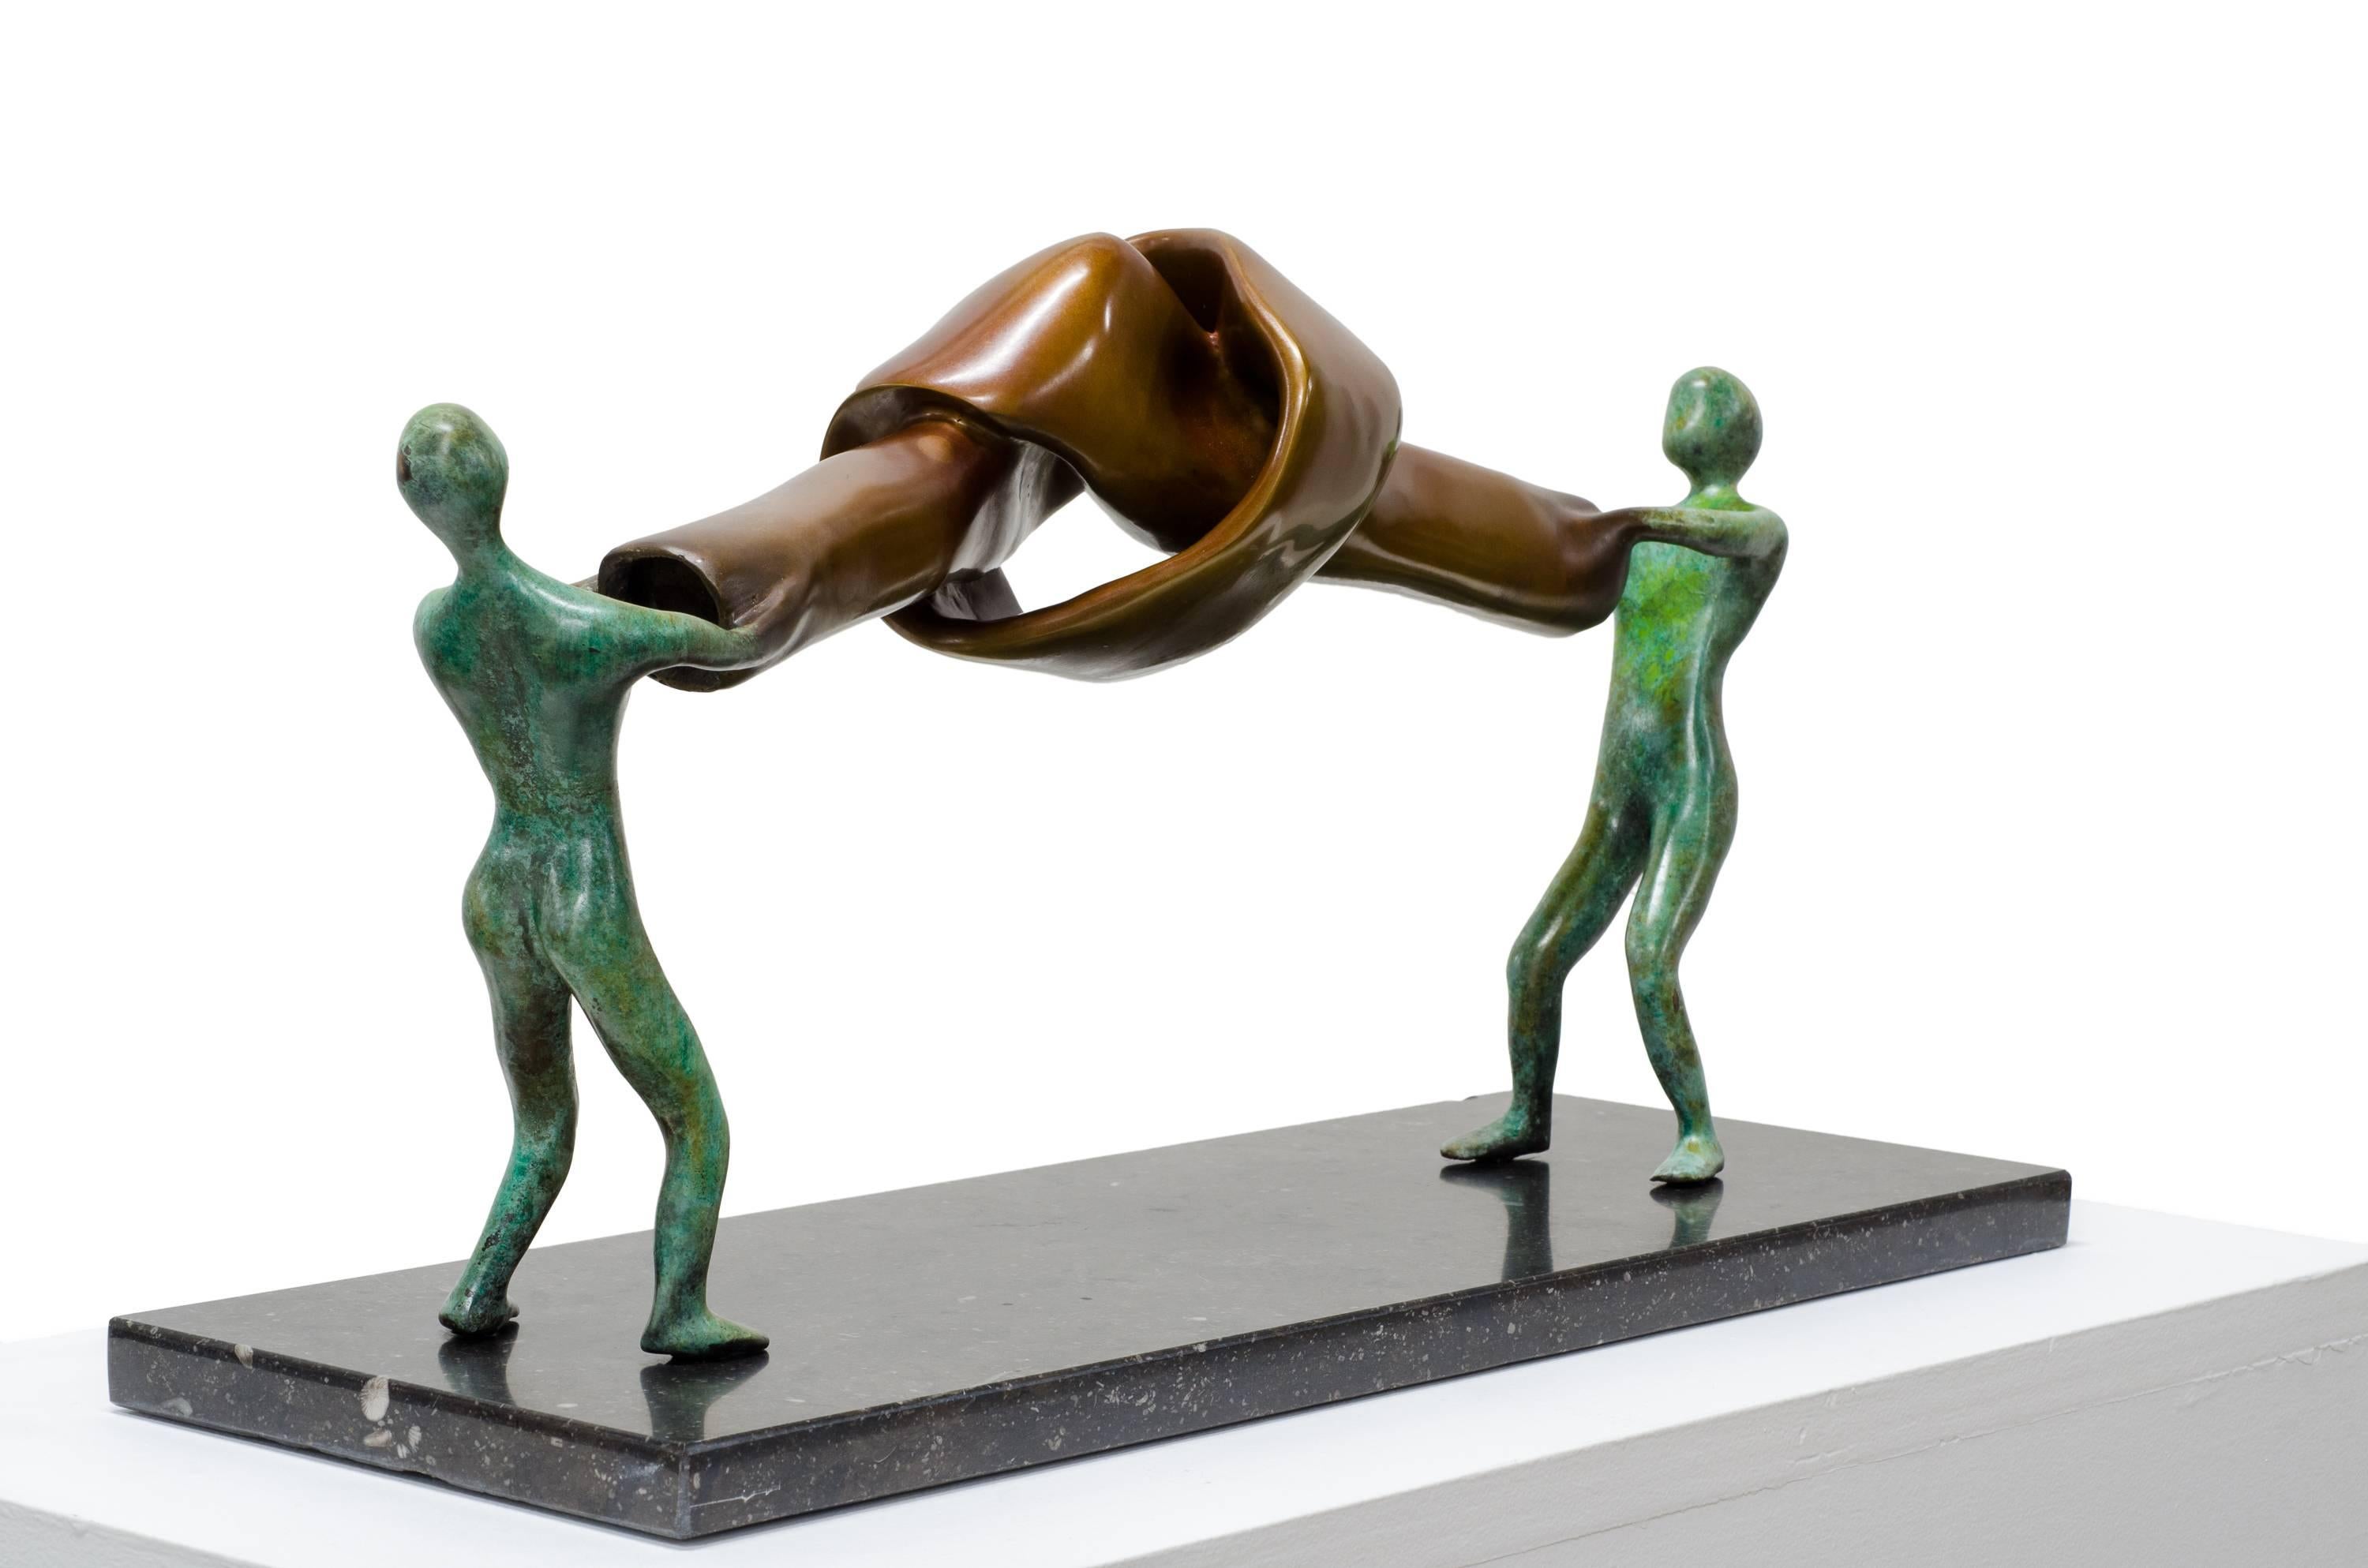 Beatriz Gerenstein Abstract Sculpture - Bonding Souls. They are working together. Building a stronger bond?